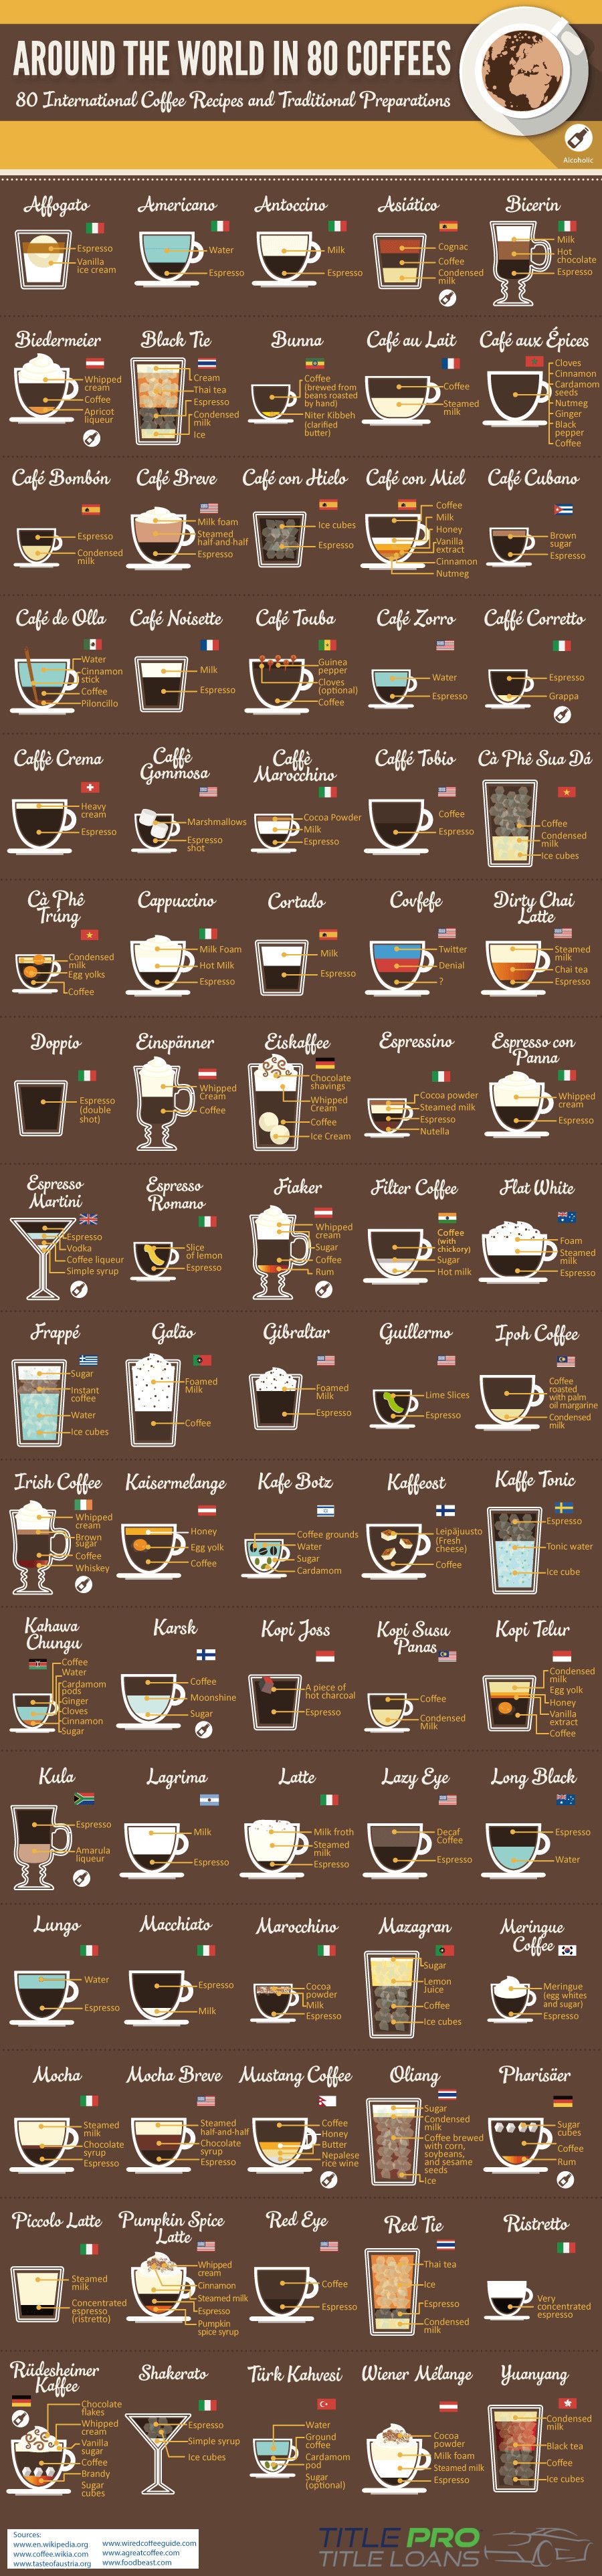 Egg Yolks & Fresh Cheese: How Different Countries Take Their Coffee | Daily Infographic